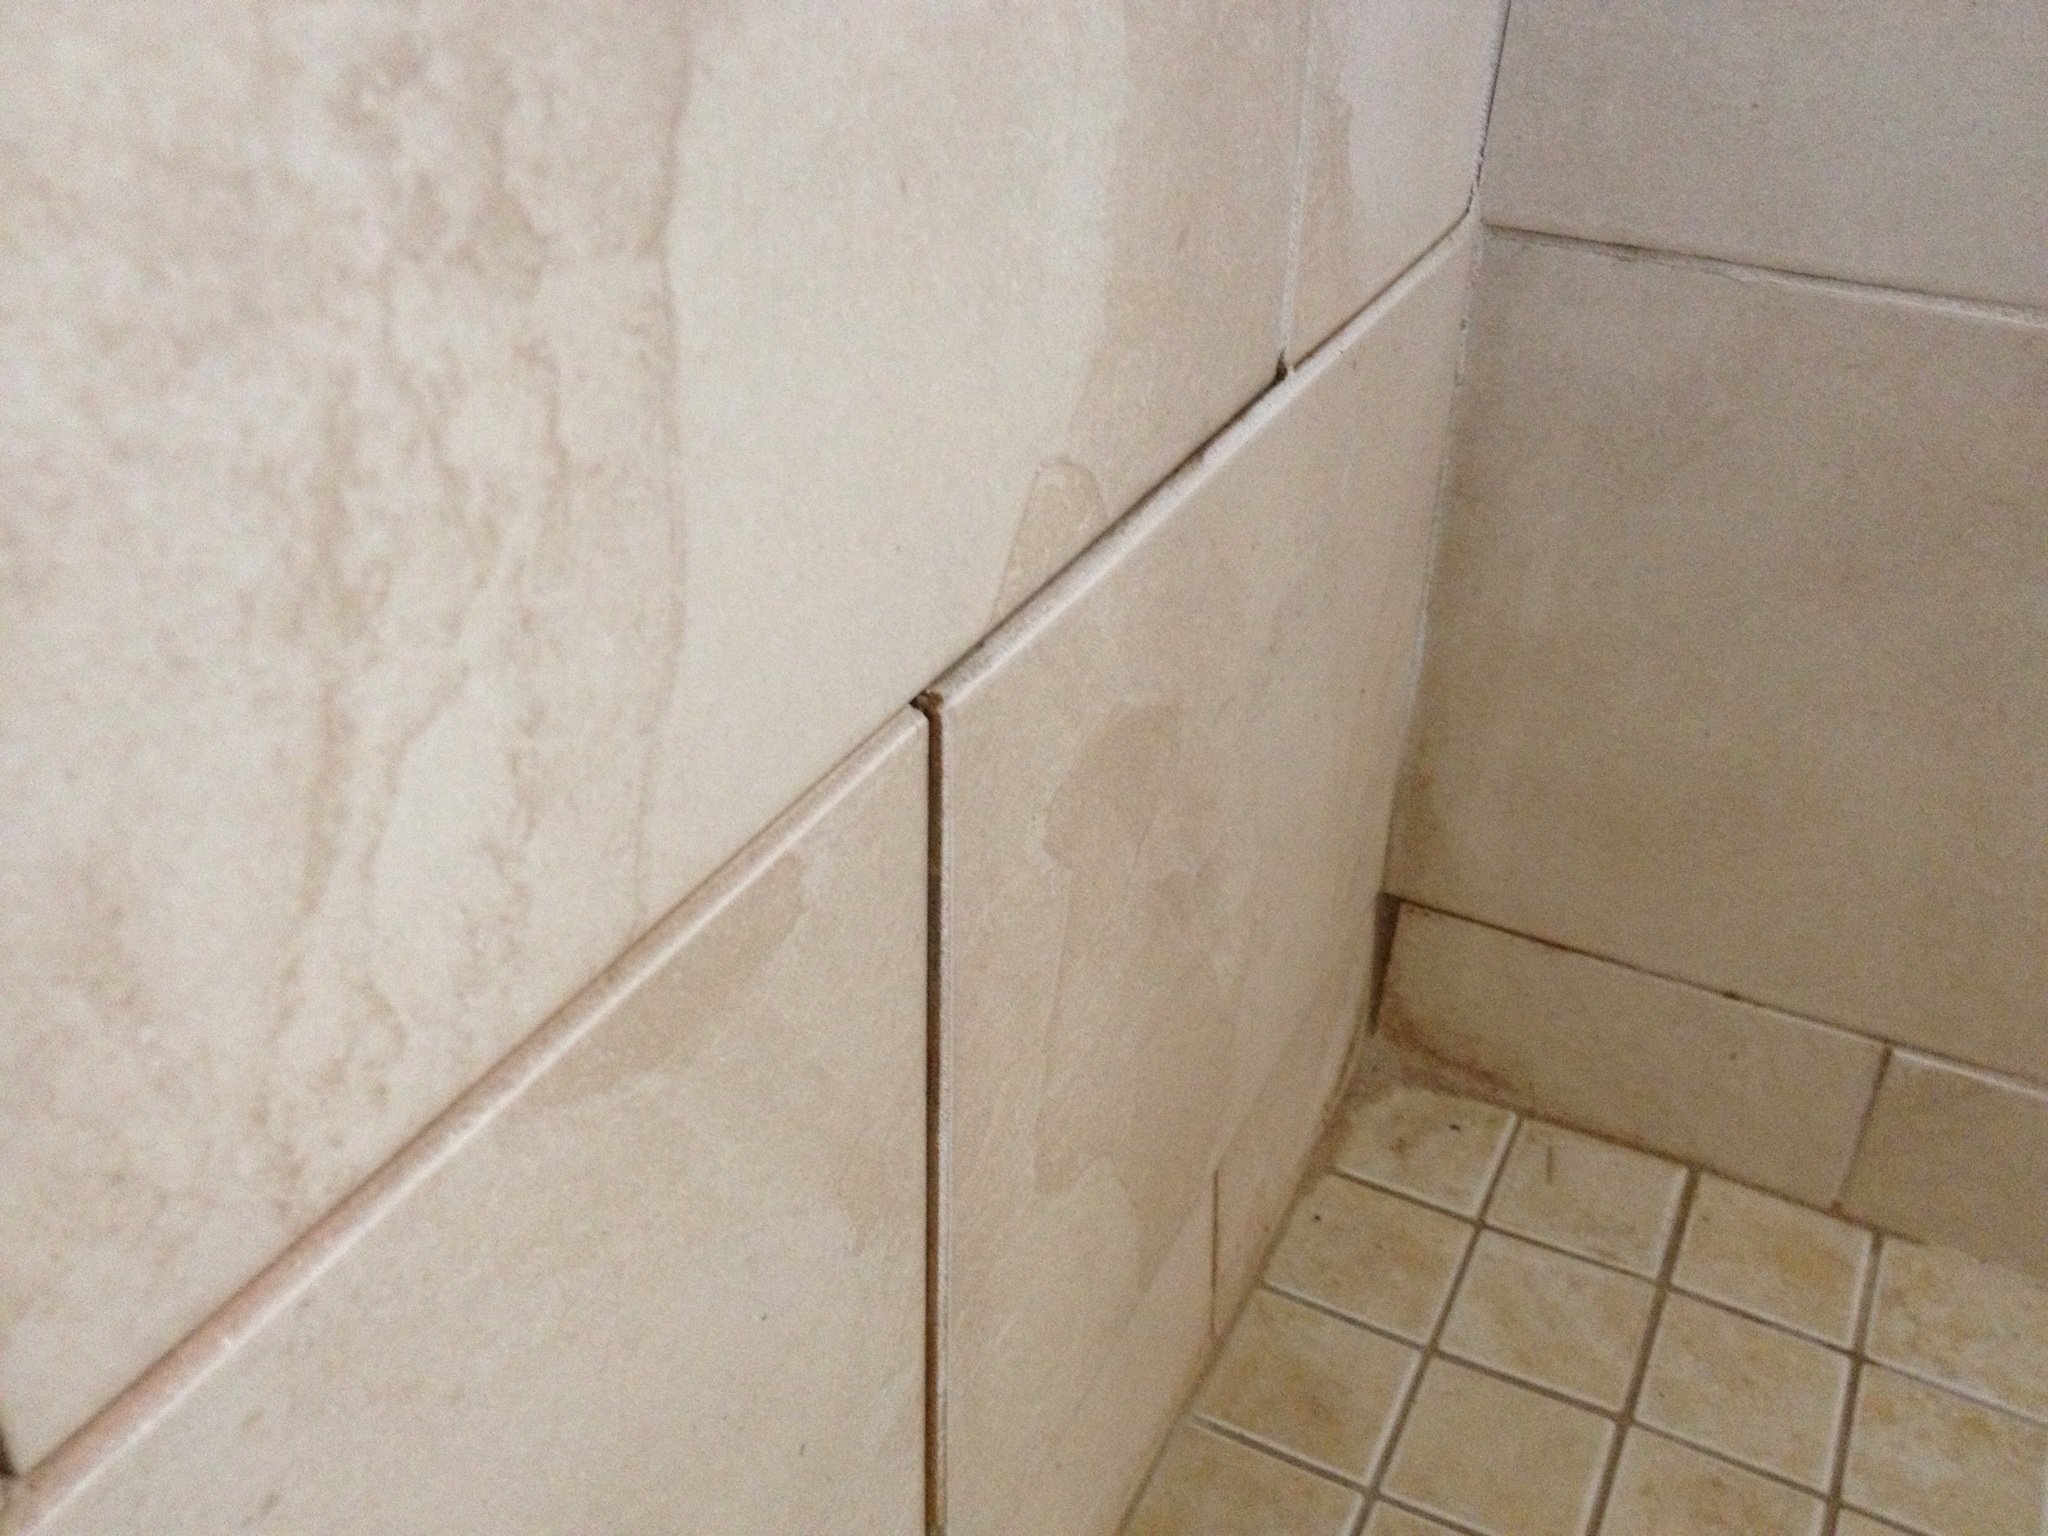 How To Repair A Loose Shower Tile B C, How To Fix Tile In Bathroom Shower